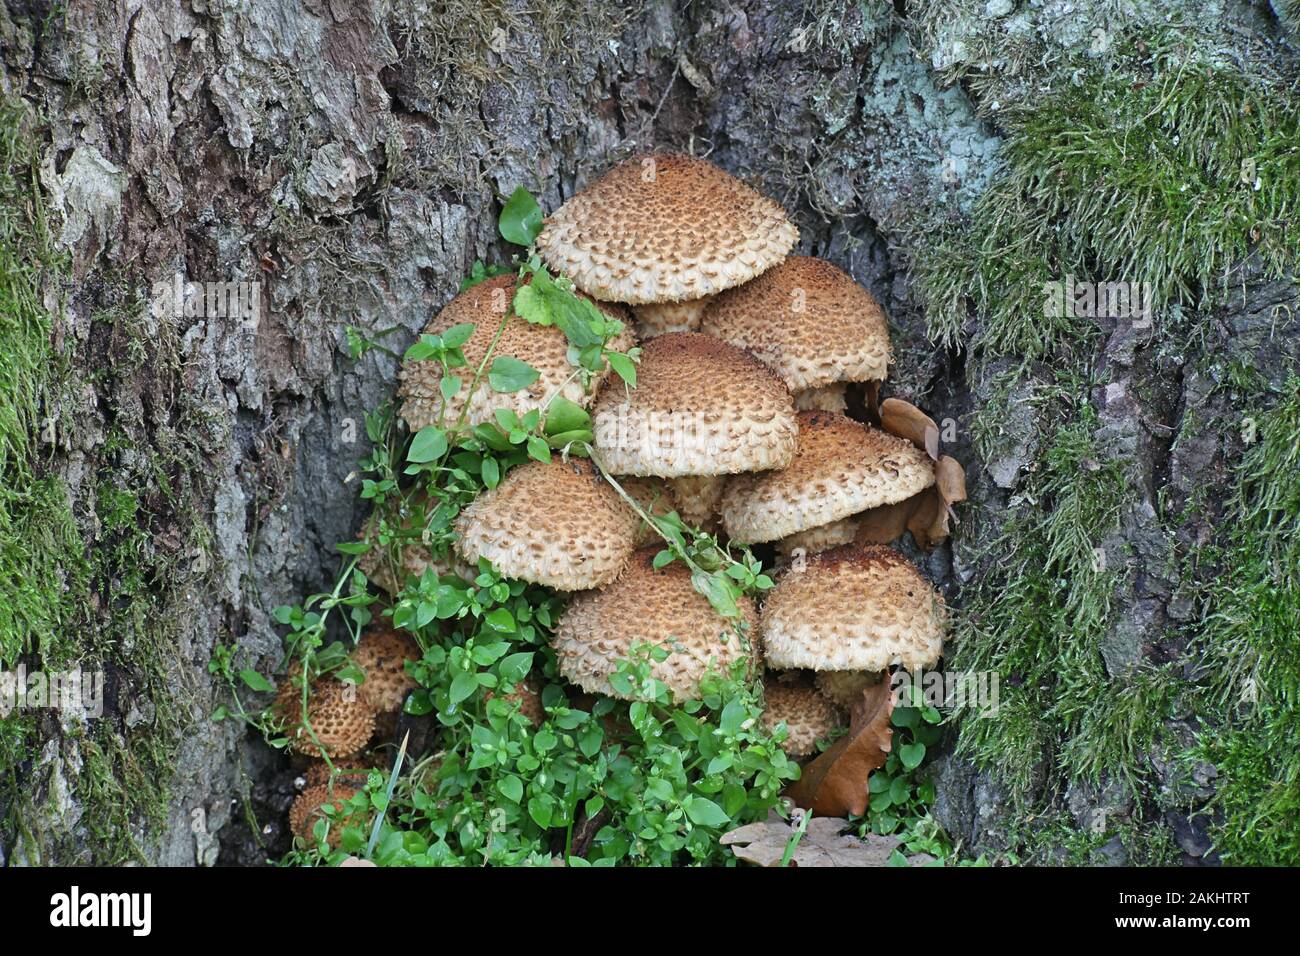 Pholiota squarrosa, commonly known as  shaggy scalycap, shaggy Pholiota, or the scaly Pholiota, mushrooms from Finland Stock Photo